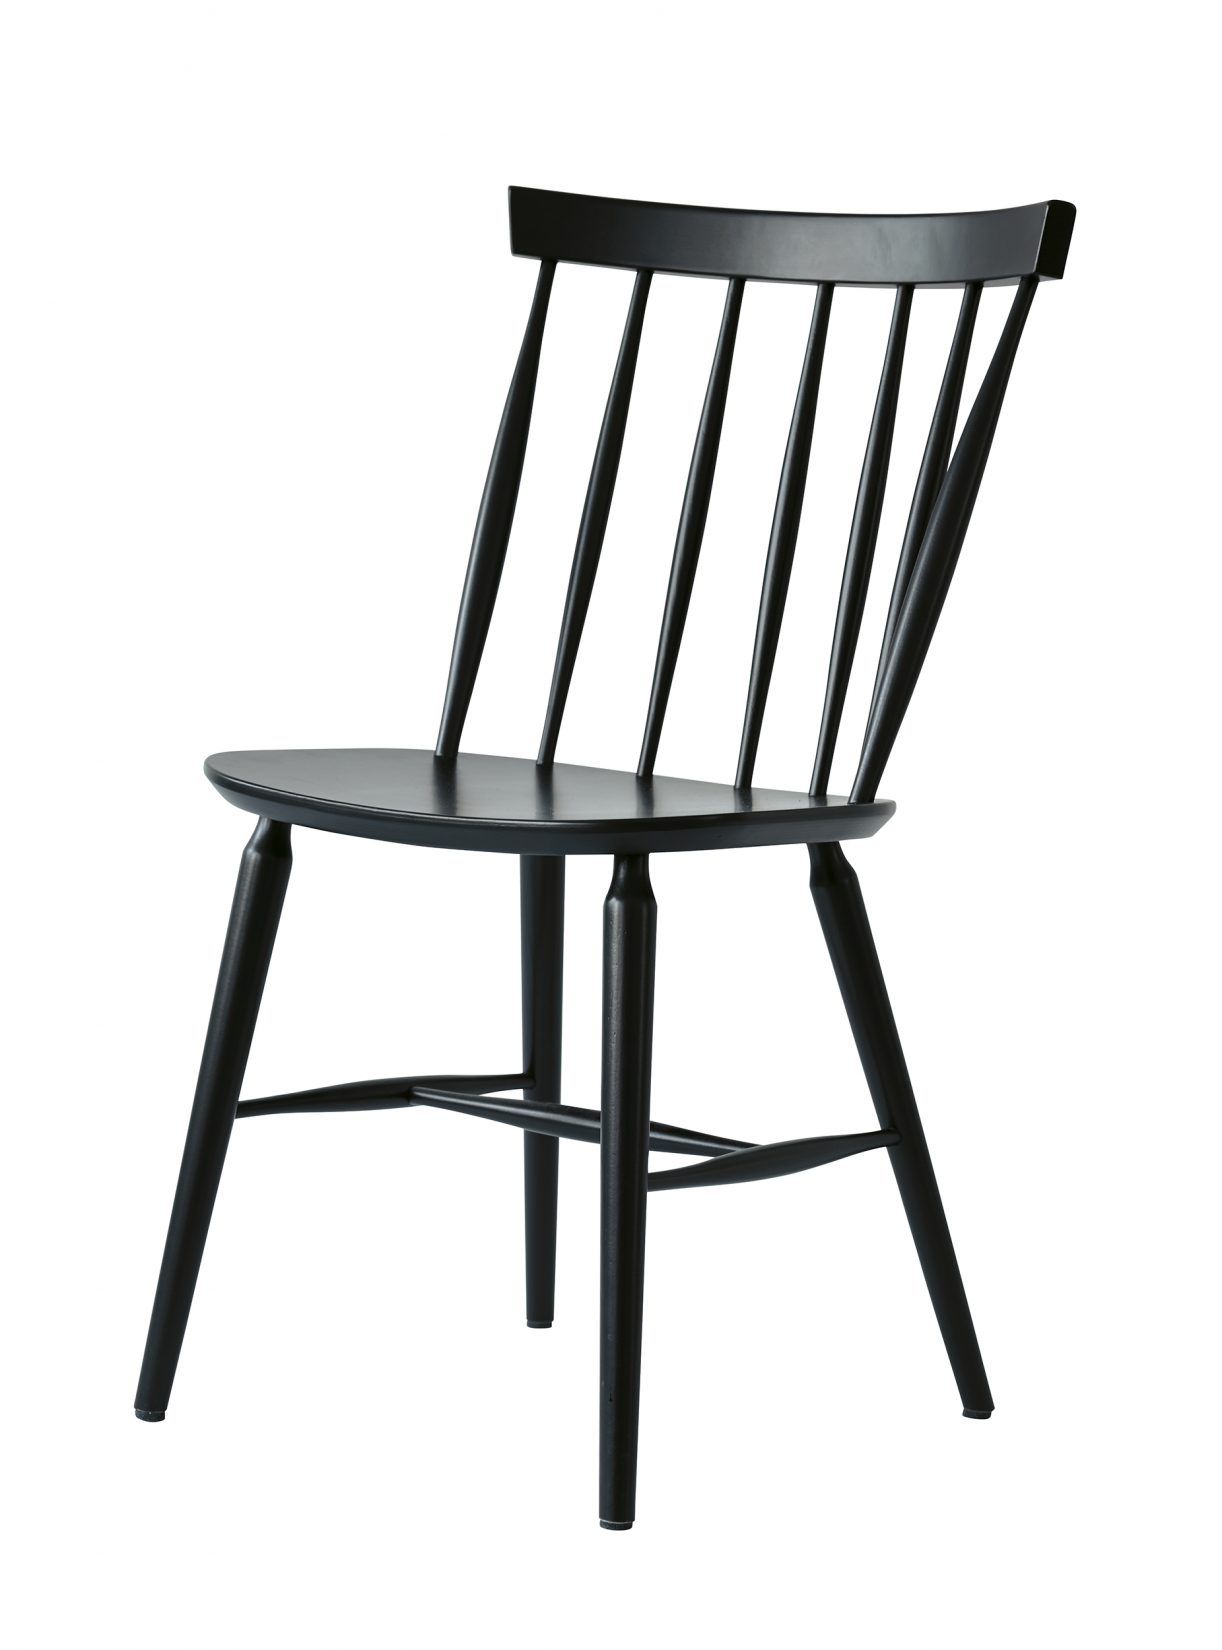 ELIZA2 DINING CHAIR（エリザ2 ダイニングチェア） - ACTUS